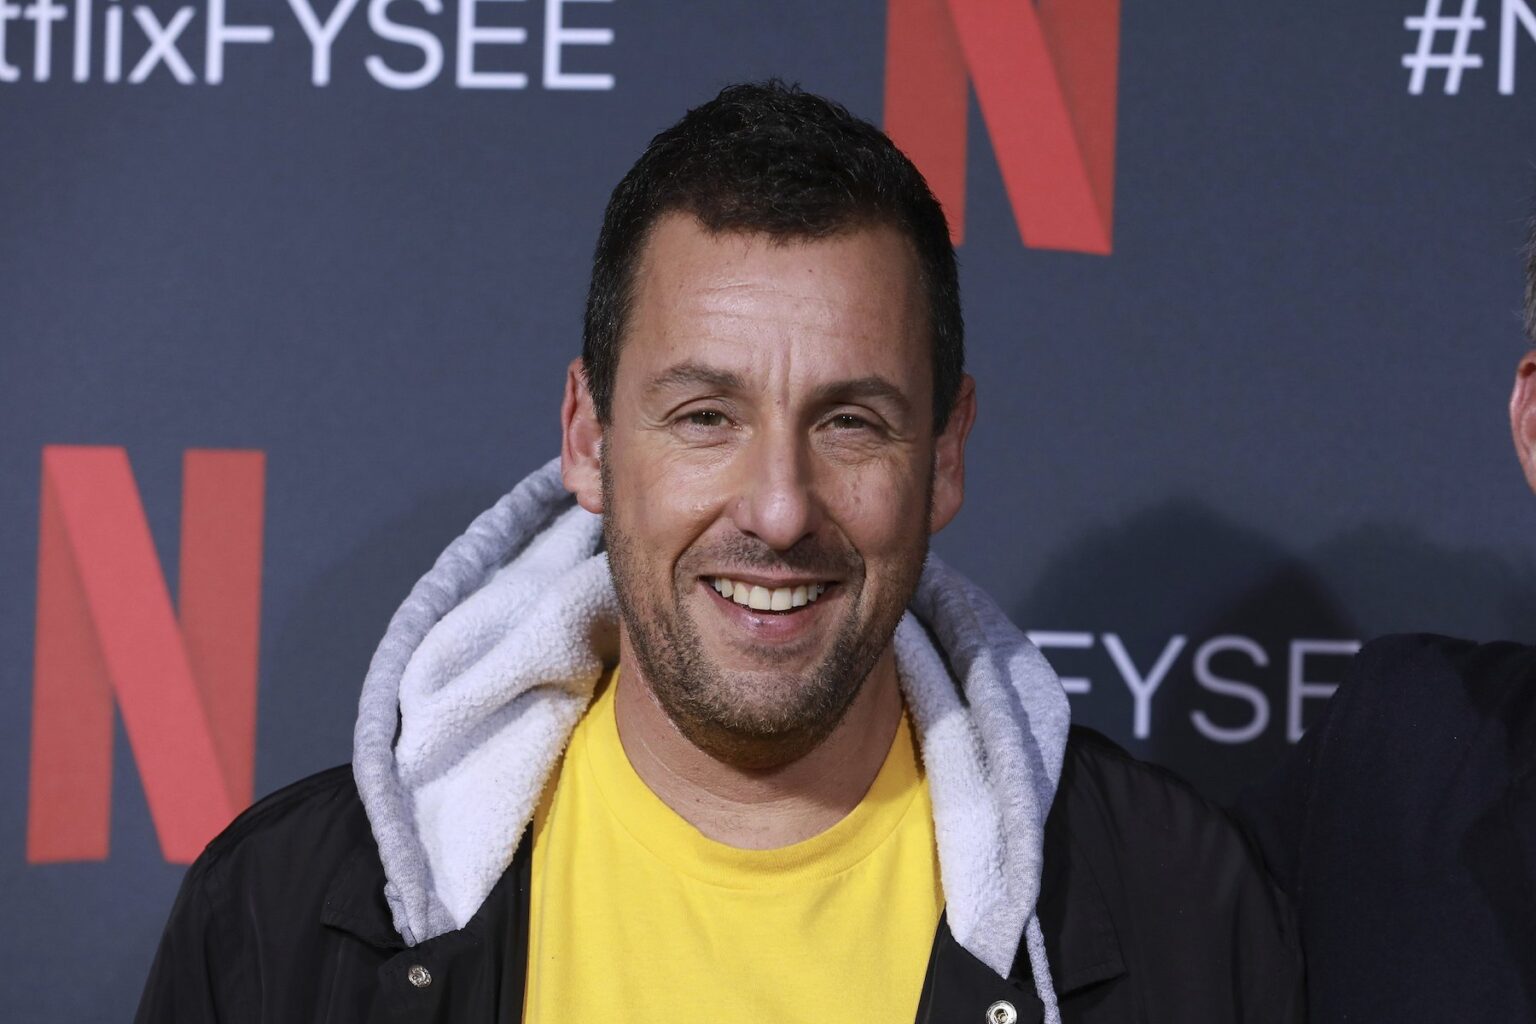 Terrible movies or not, we know Adam Sandler is making bank. Find out just how uncut the comedian's gems really are as we uncover his net worth!